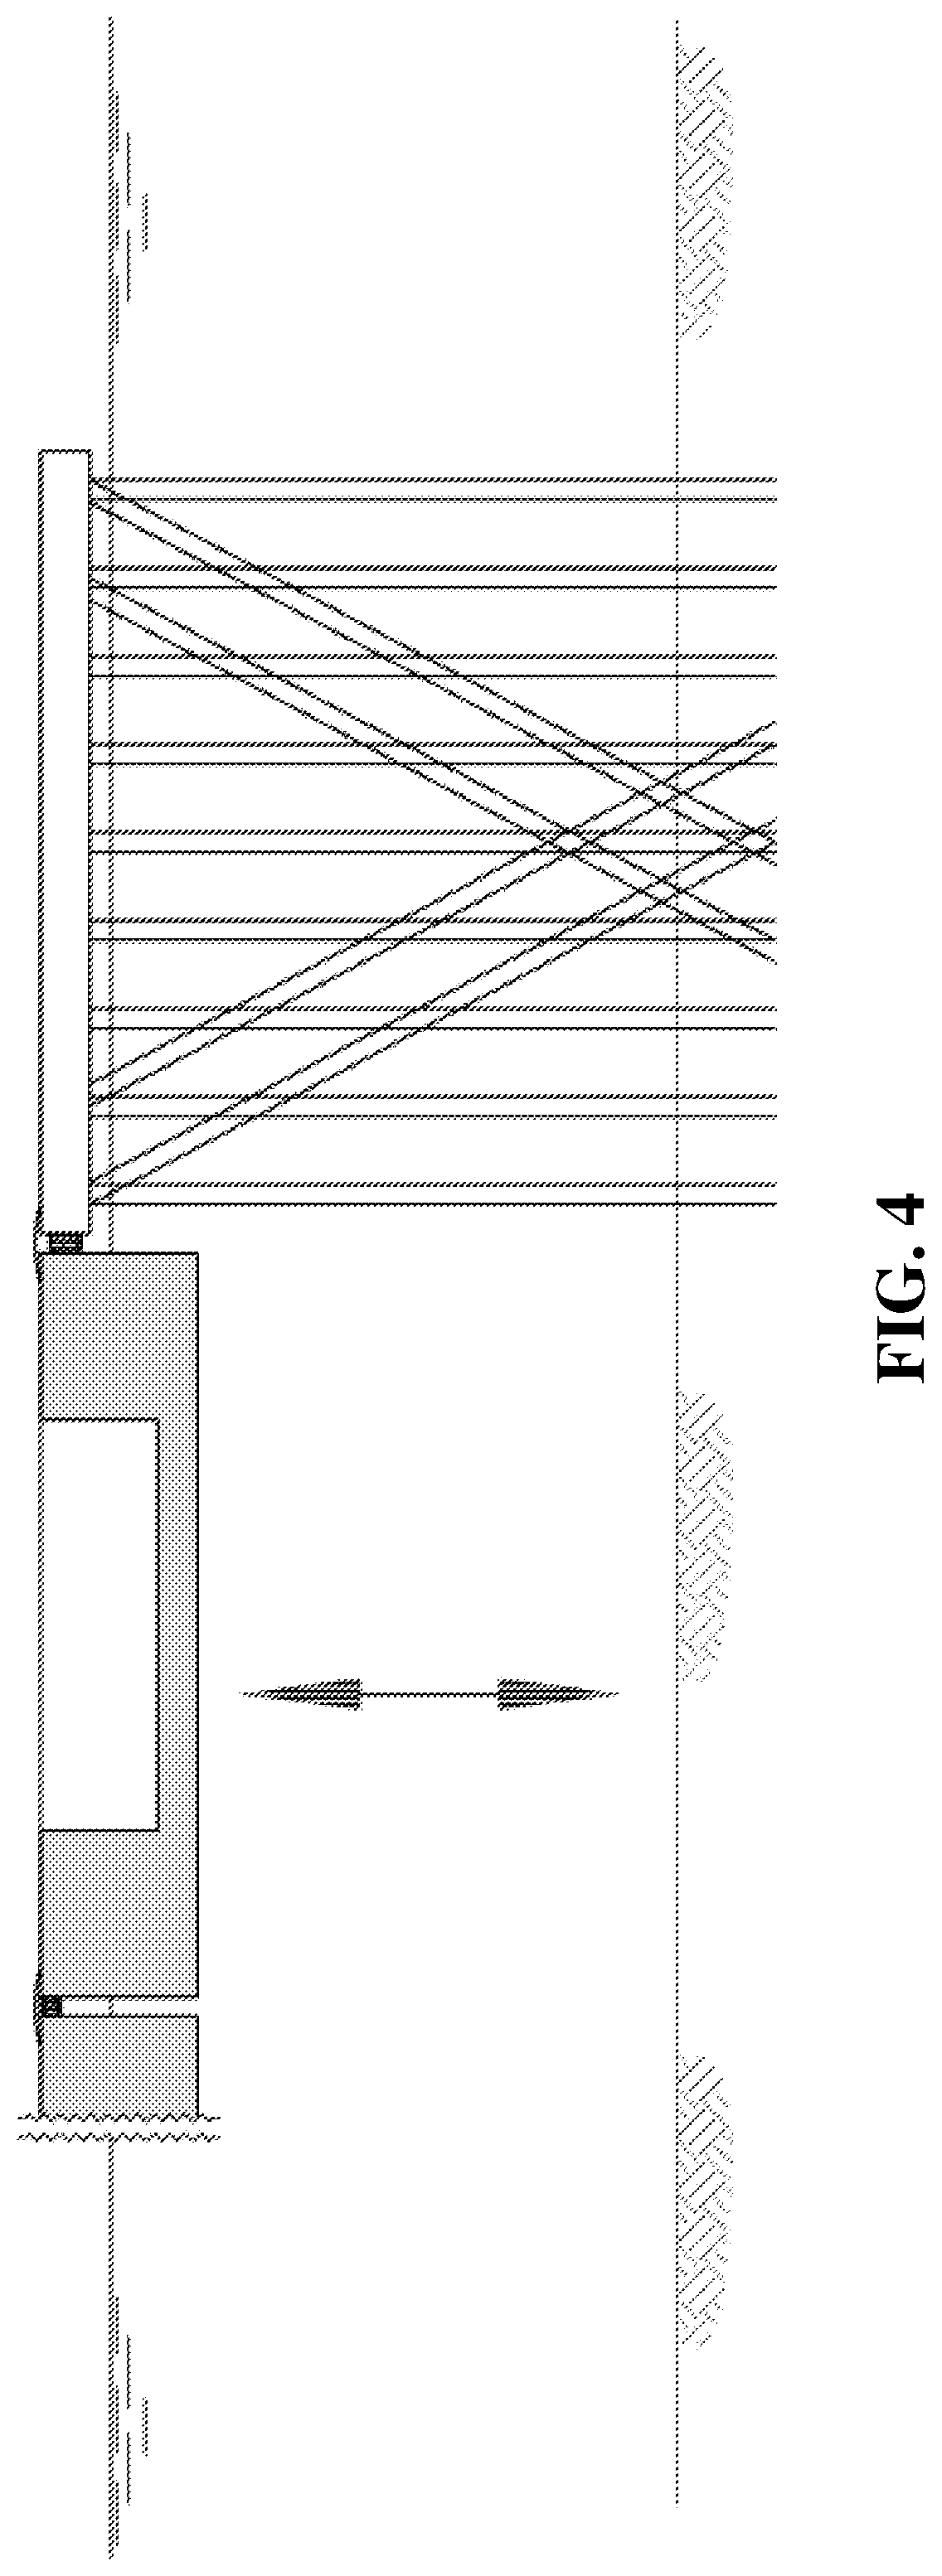 A marine construction and a method for constructing the same